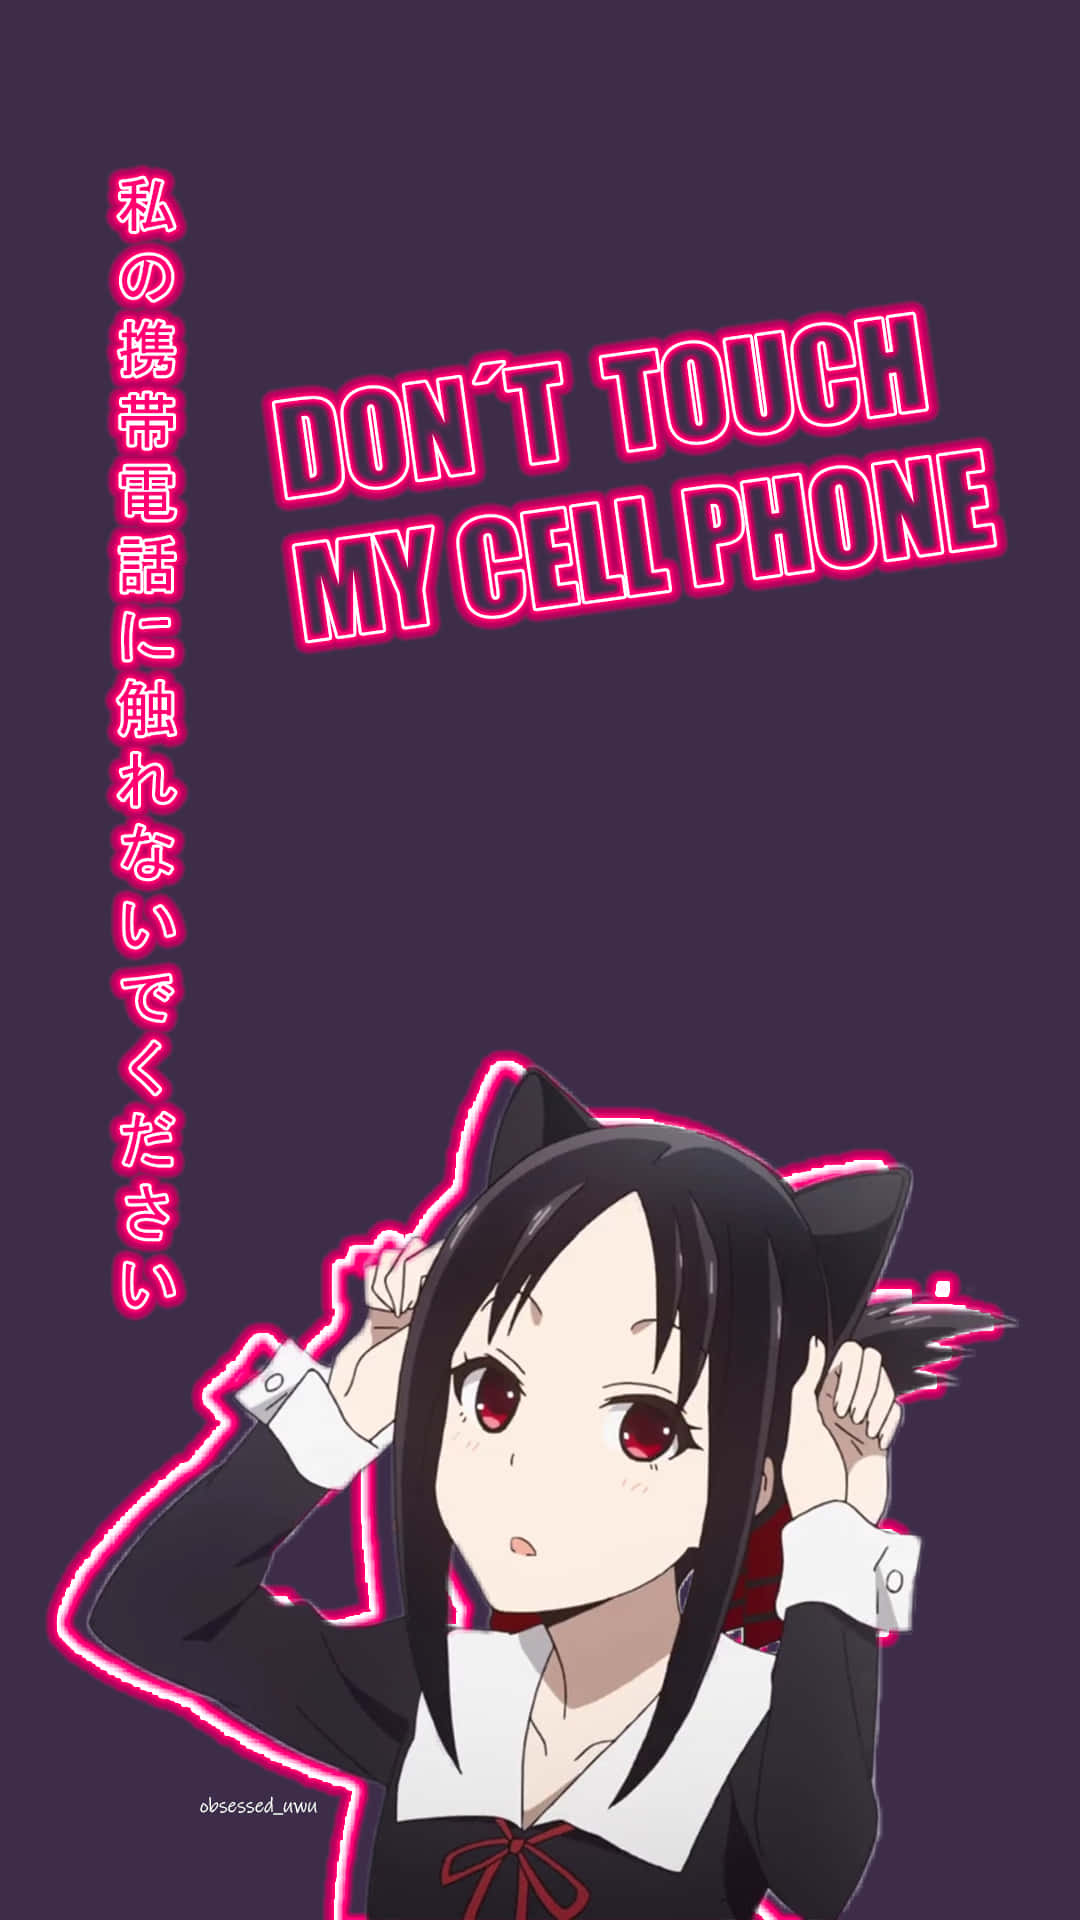 "Protect Your Phone - No Trespassing!" Wallpaper